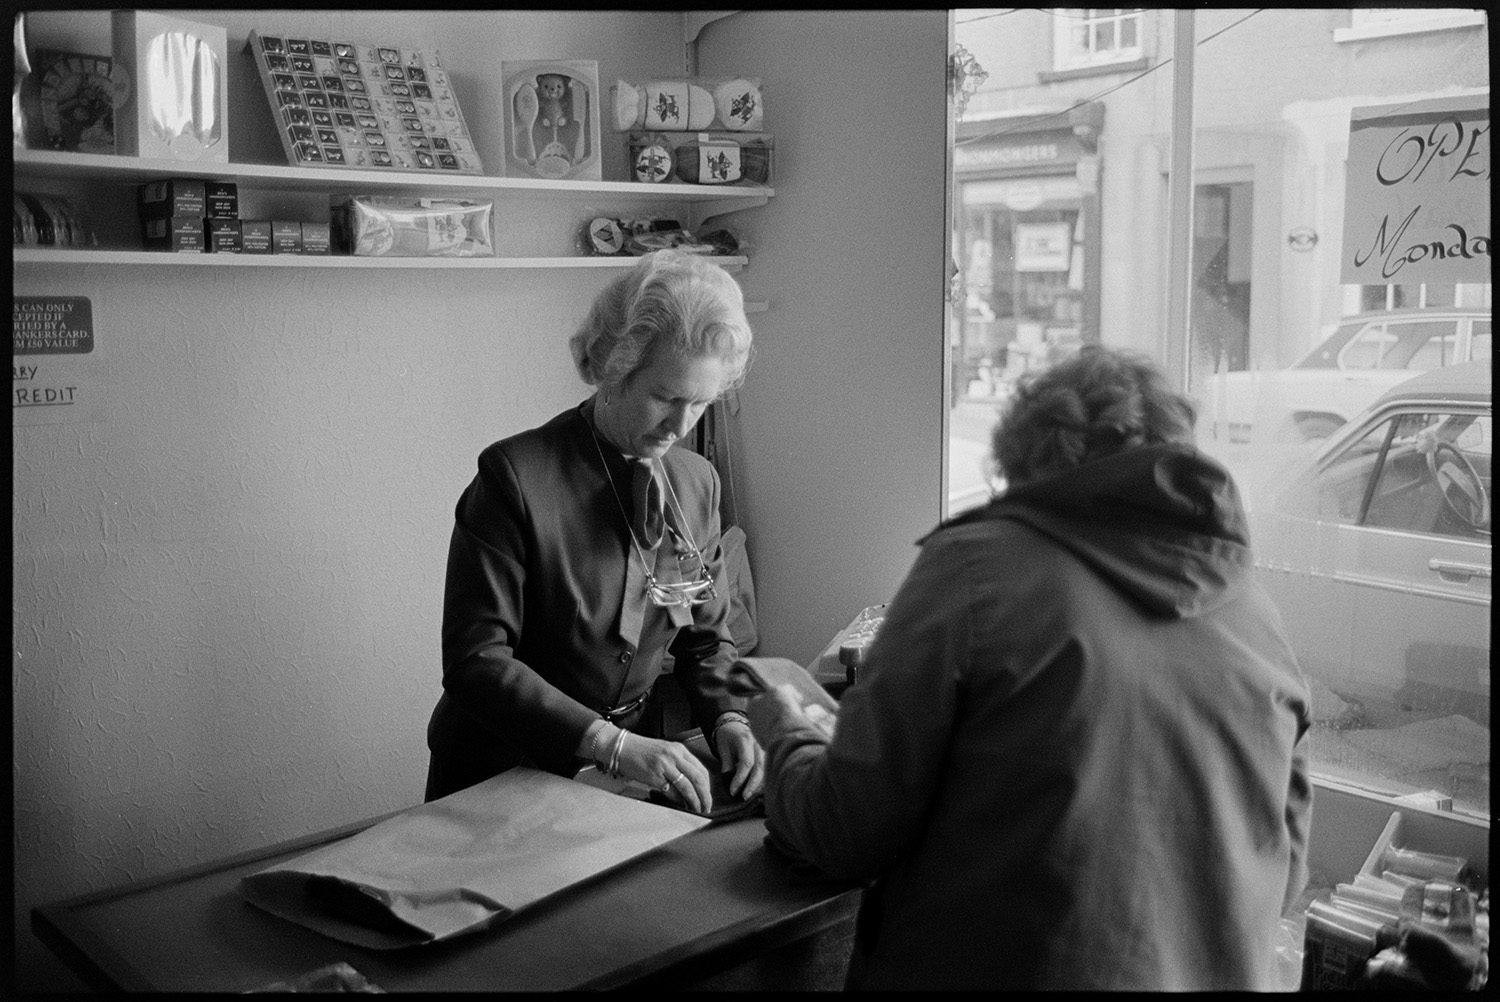 Clothes shop, woman proprietor serving customer on first day of business.
[A woman proprietor serving a customer on her first day of business in Birkett's clothes shop in Chulmleigh. Gifts, including jewellery, are displayed on shelves behind the counter. Through the shop window can be seen parked cars on Fore Street.]